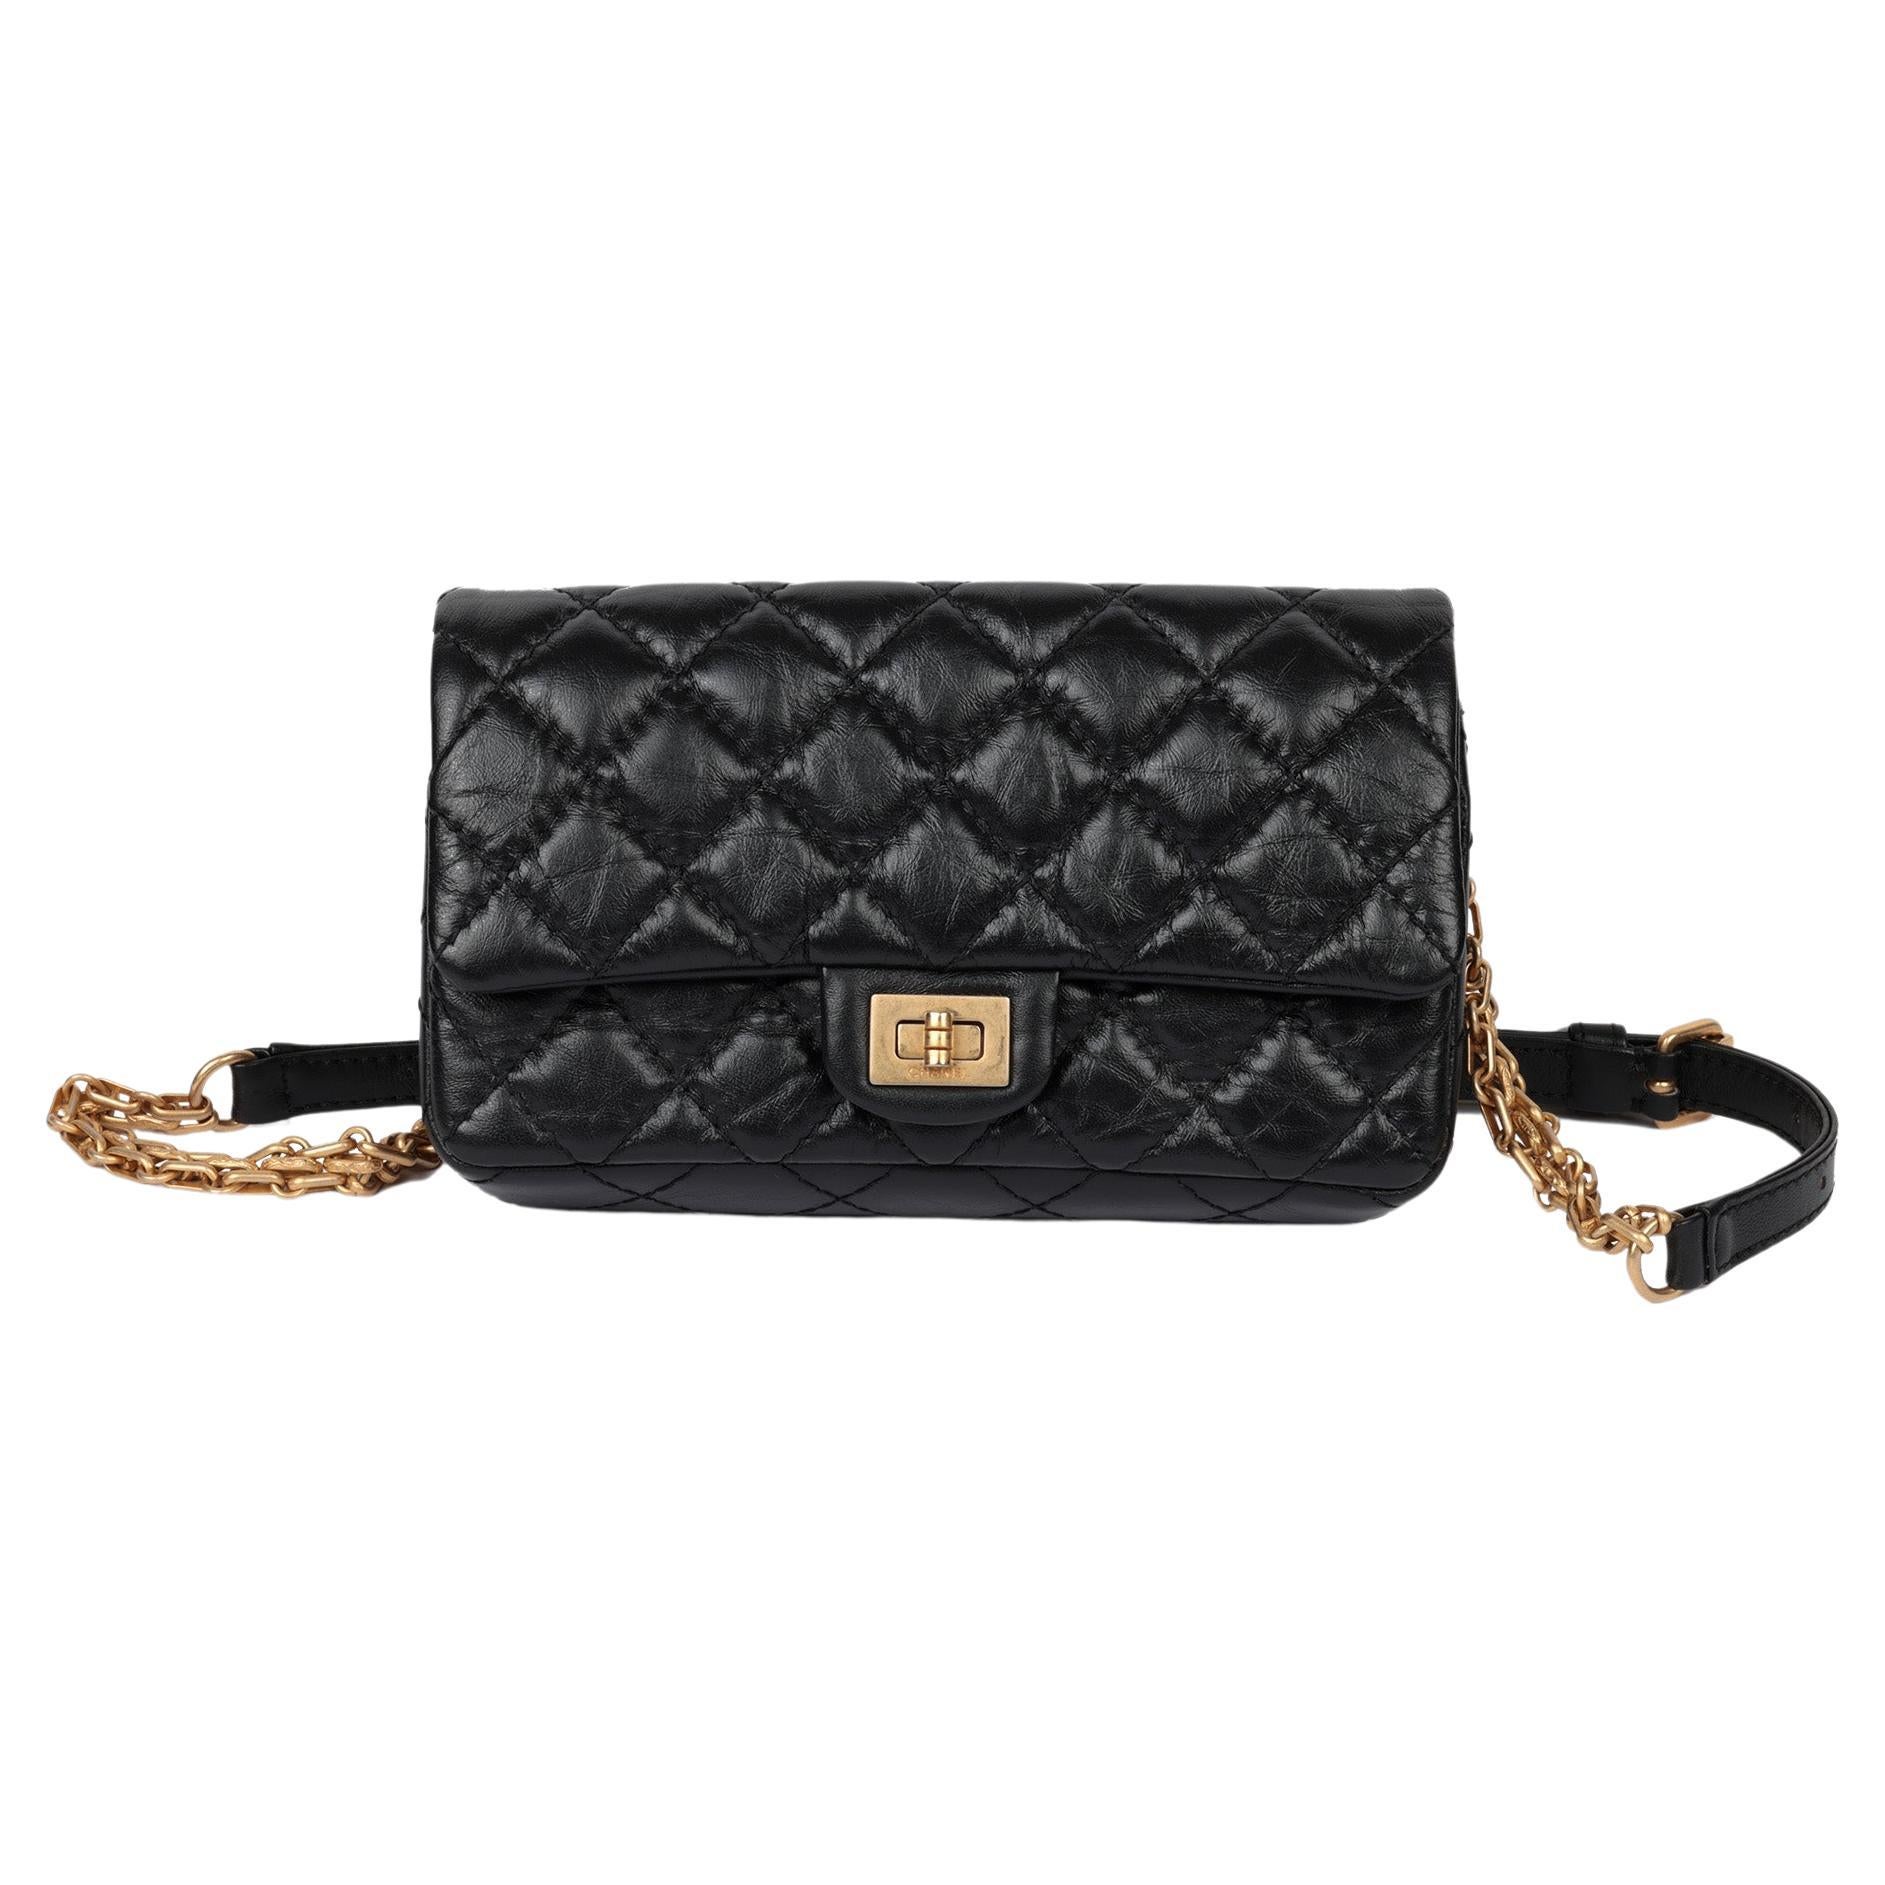 Chanel Black Quilted Aged Calfskin Leather 2.55 Reissue Belt Bag For Sale